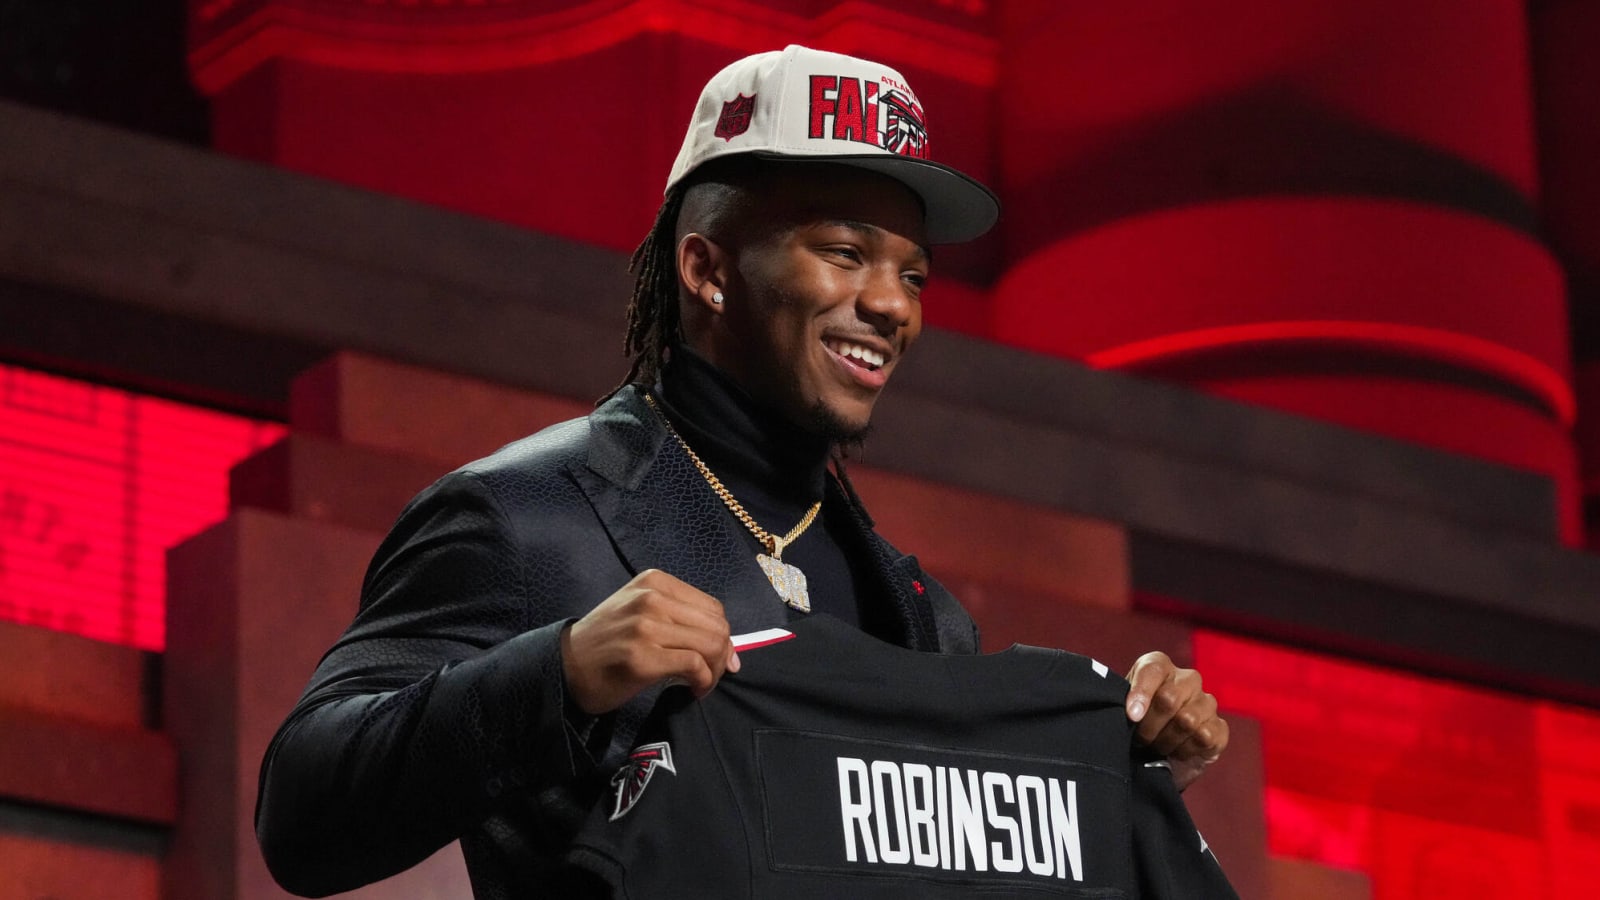 Falcons reported “logic” of taking Bijan Robinson is concerning